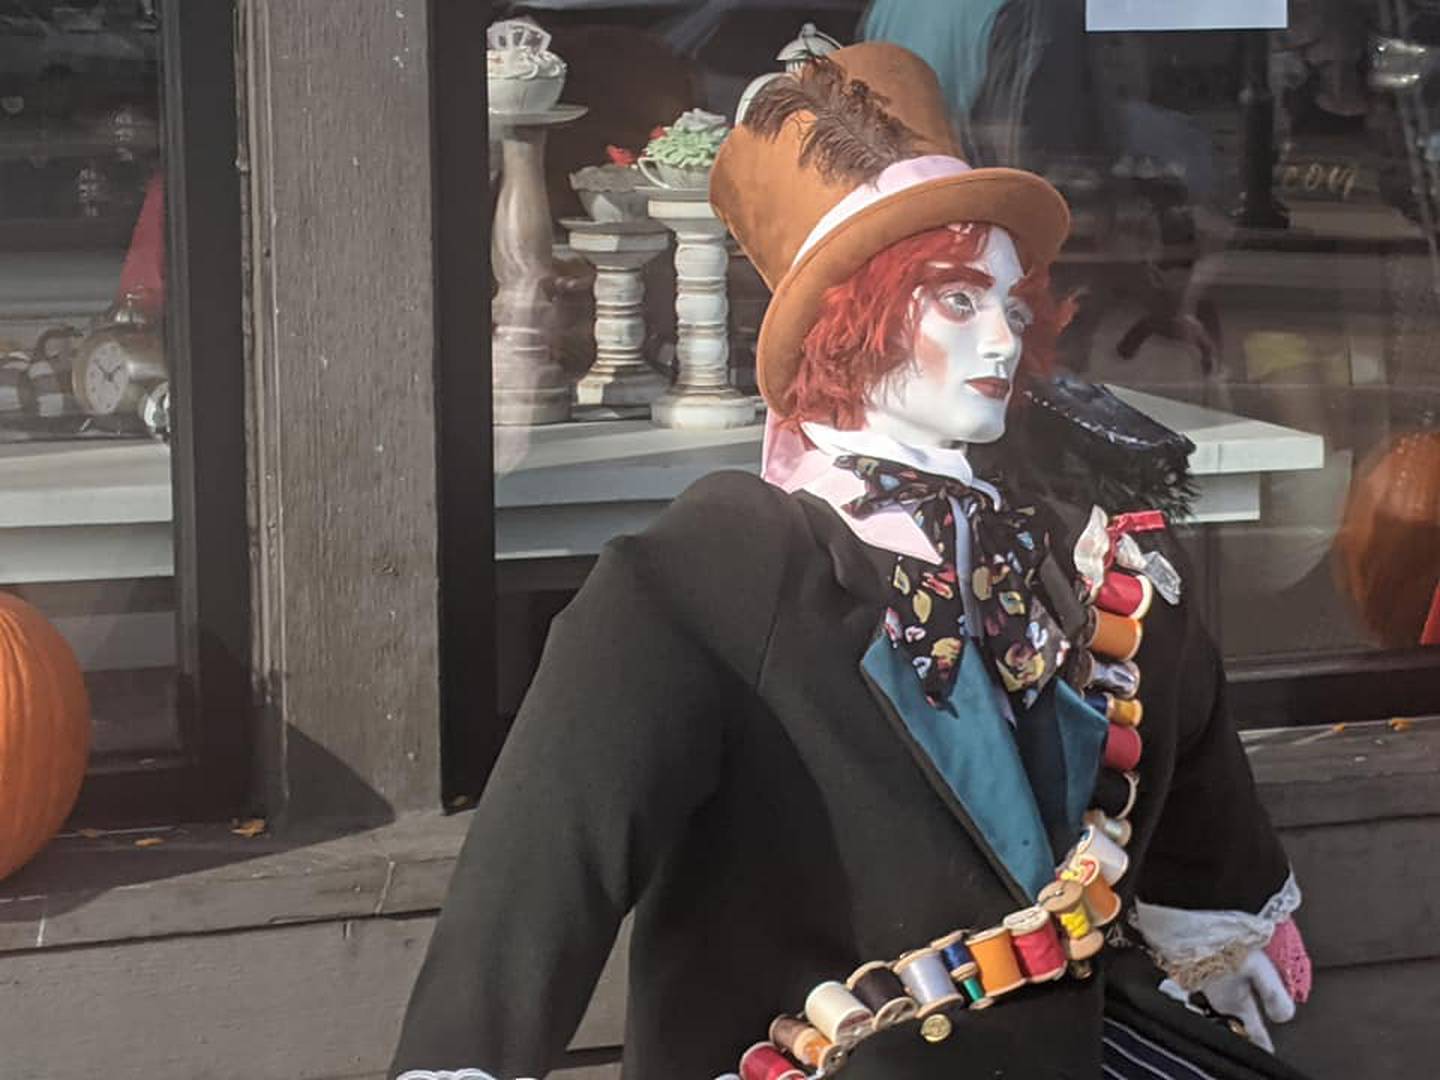 Thousands flock to downtown St. Charles for Scarecrow Festival Shaw Local